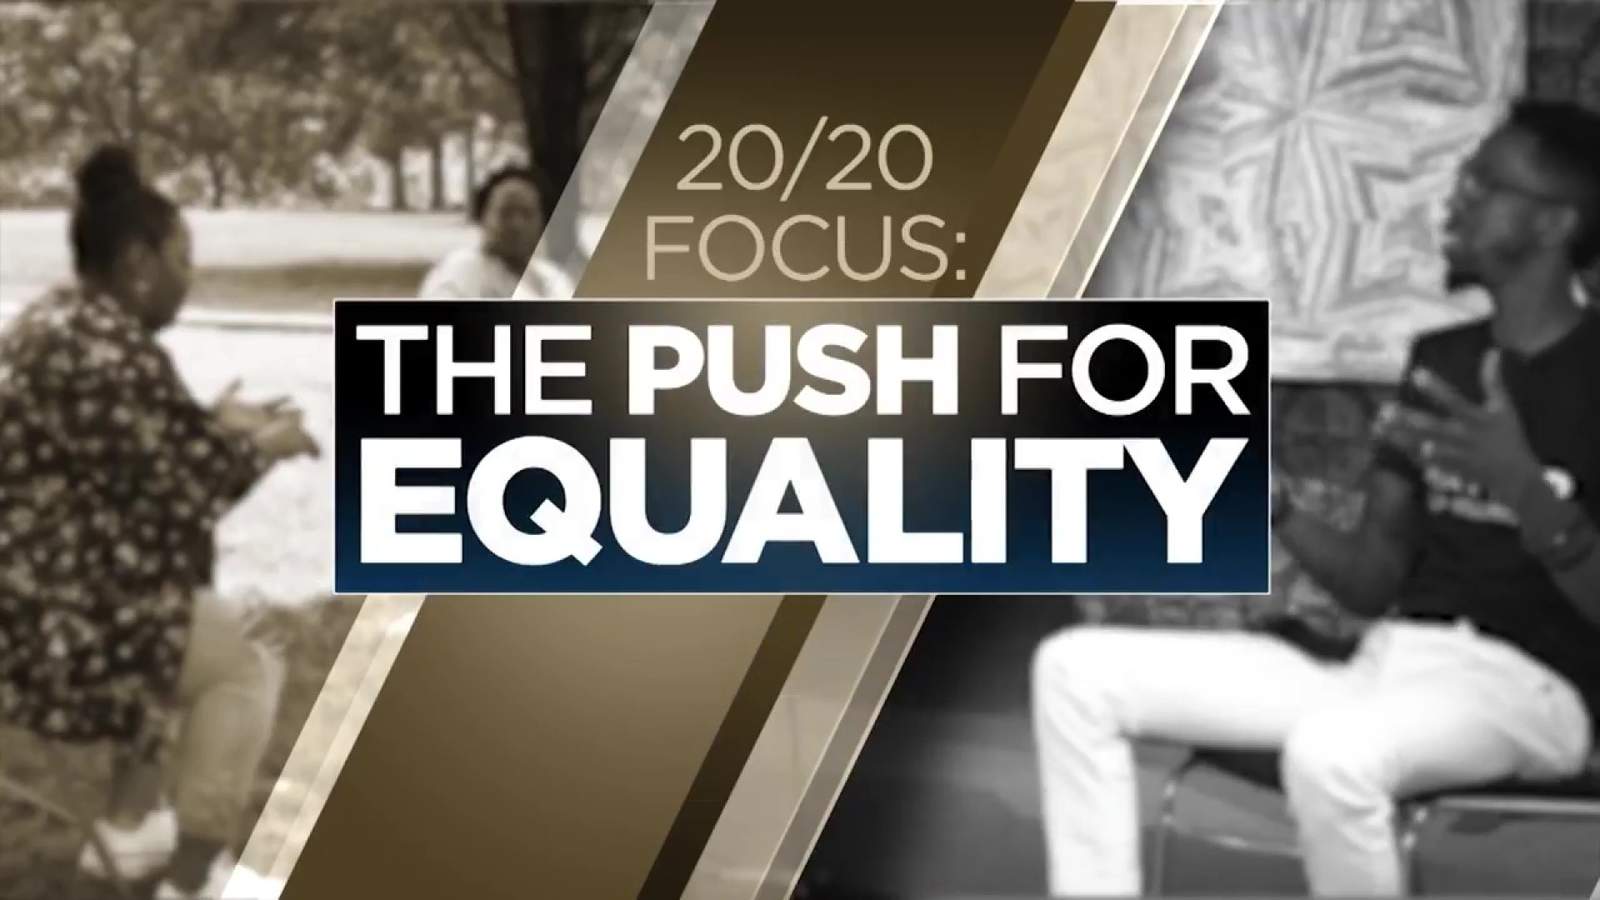 10 News airing hour-long special report focused on the push for equality